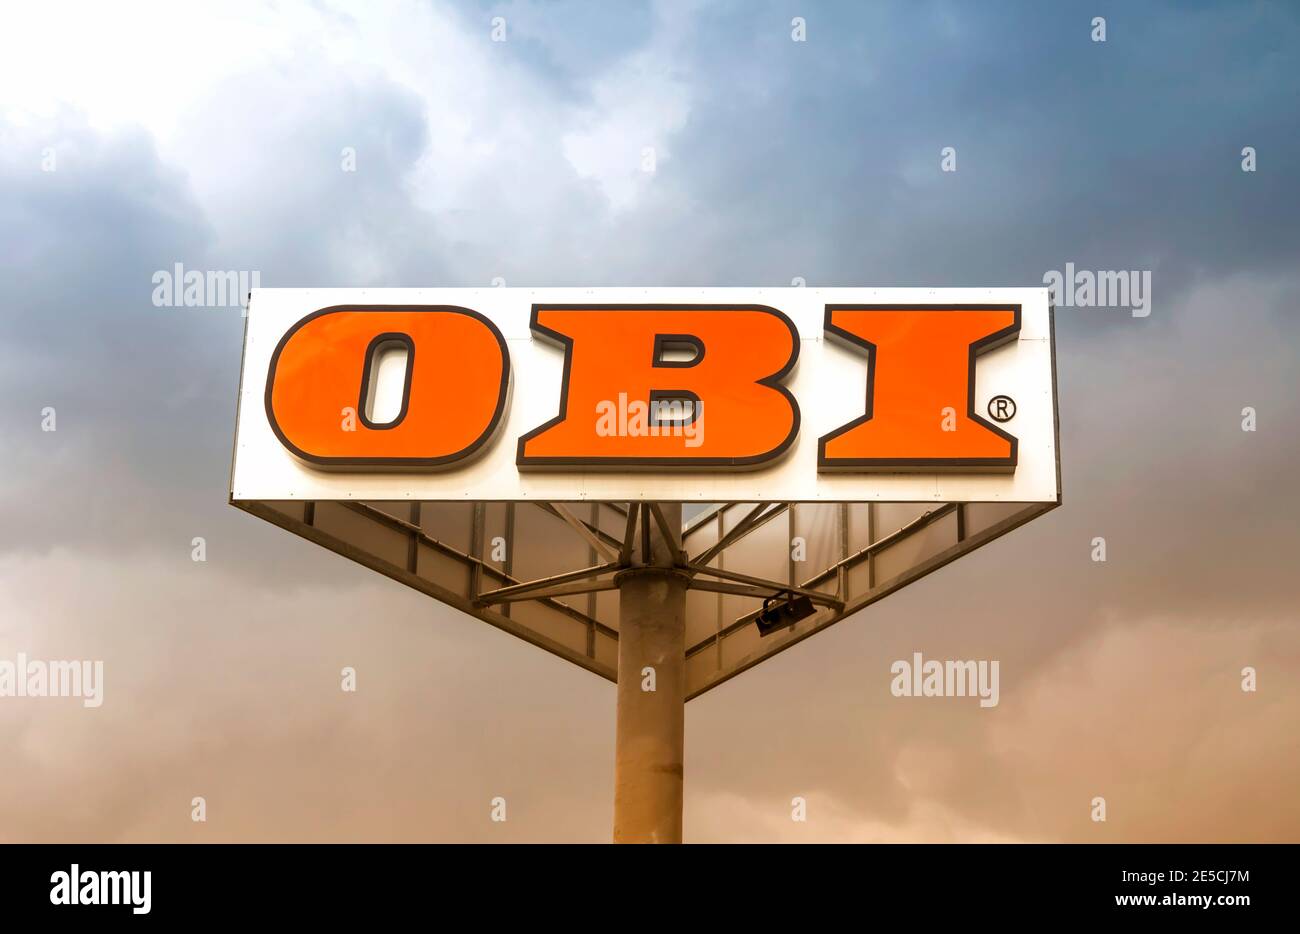 Obi Market High Resolution Stock Photography And Images Alamy